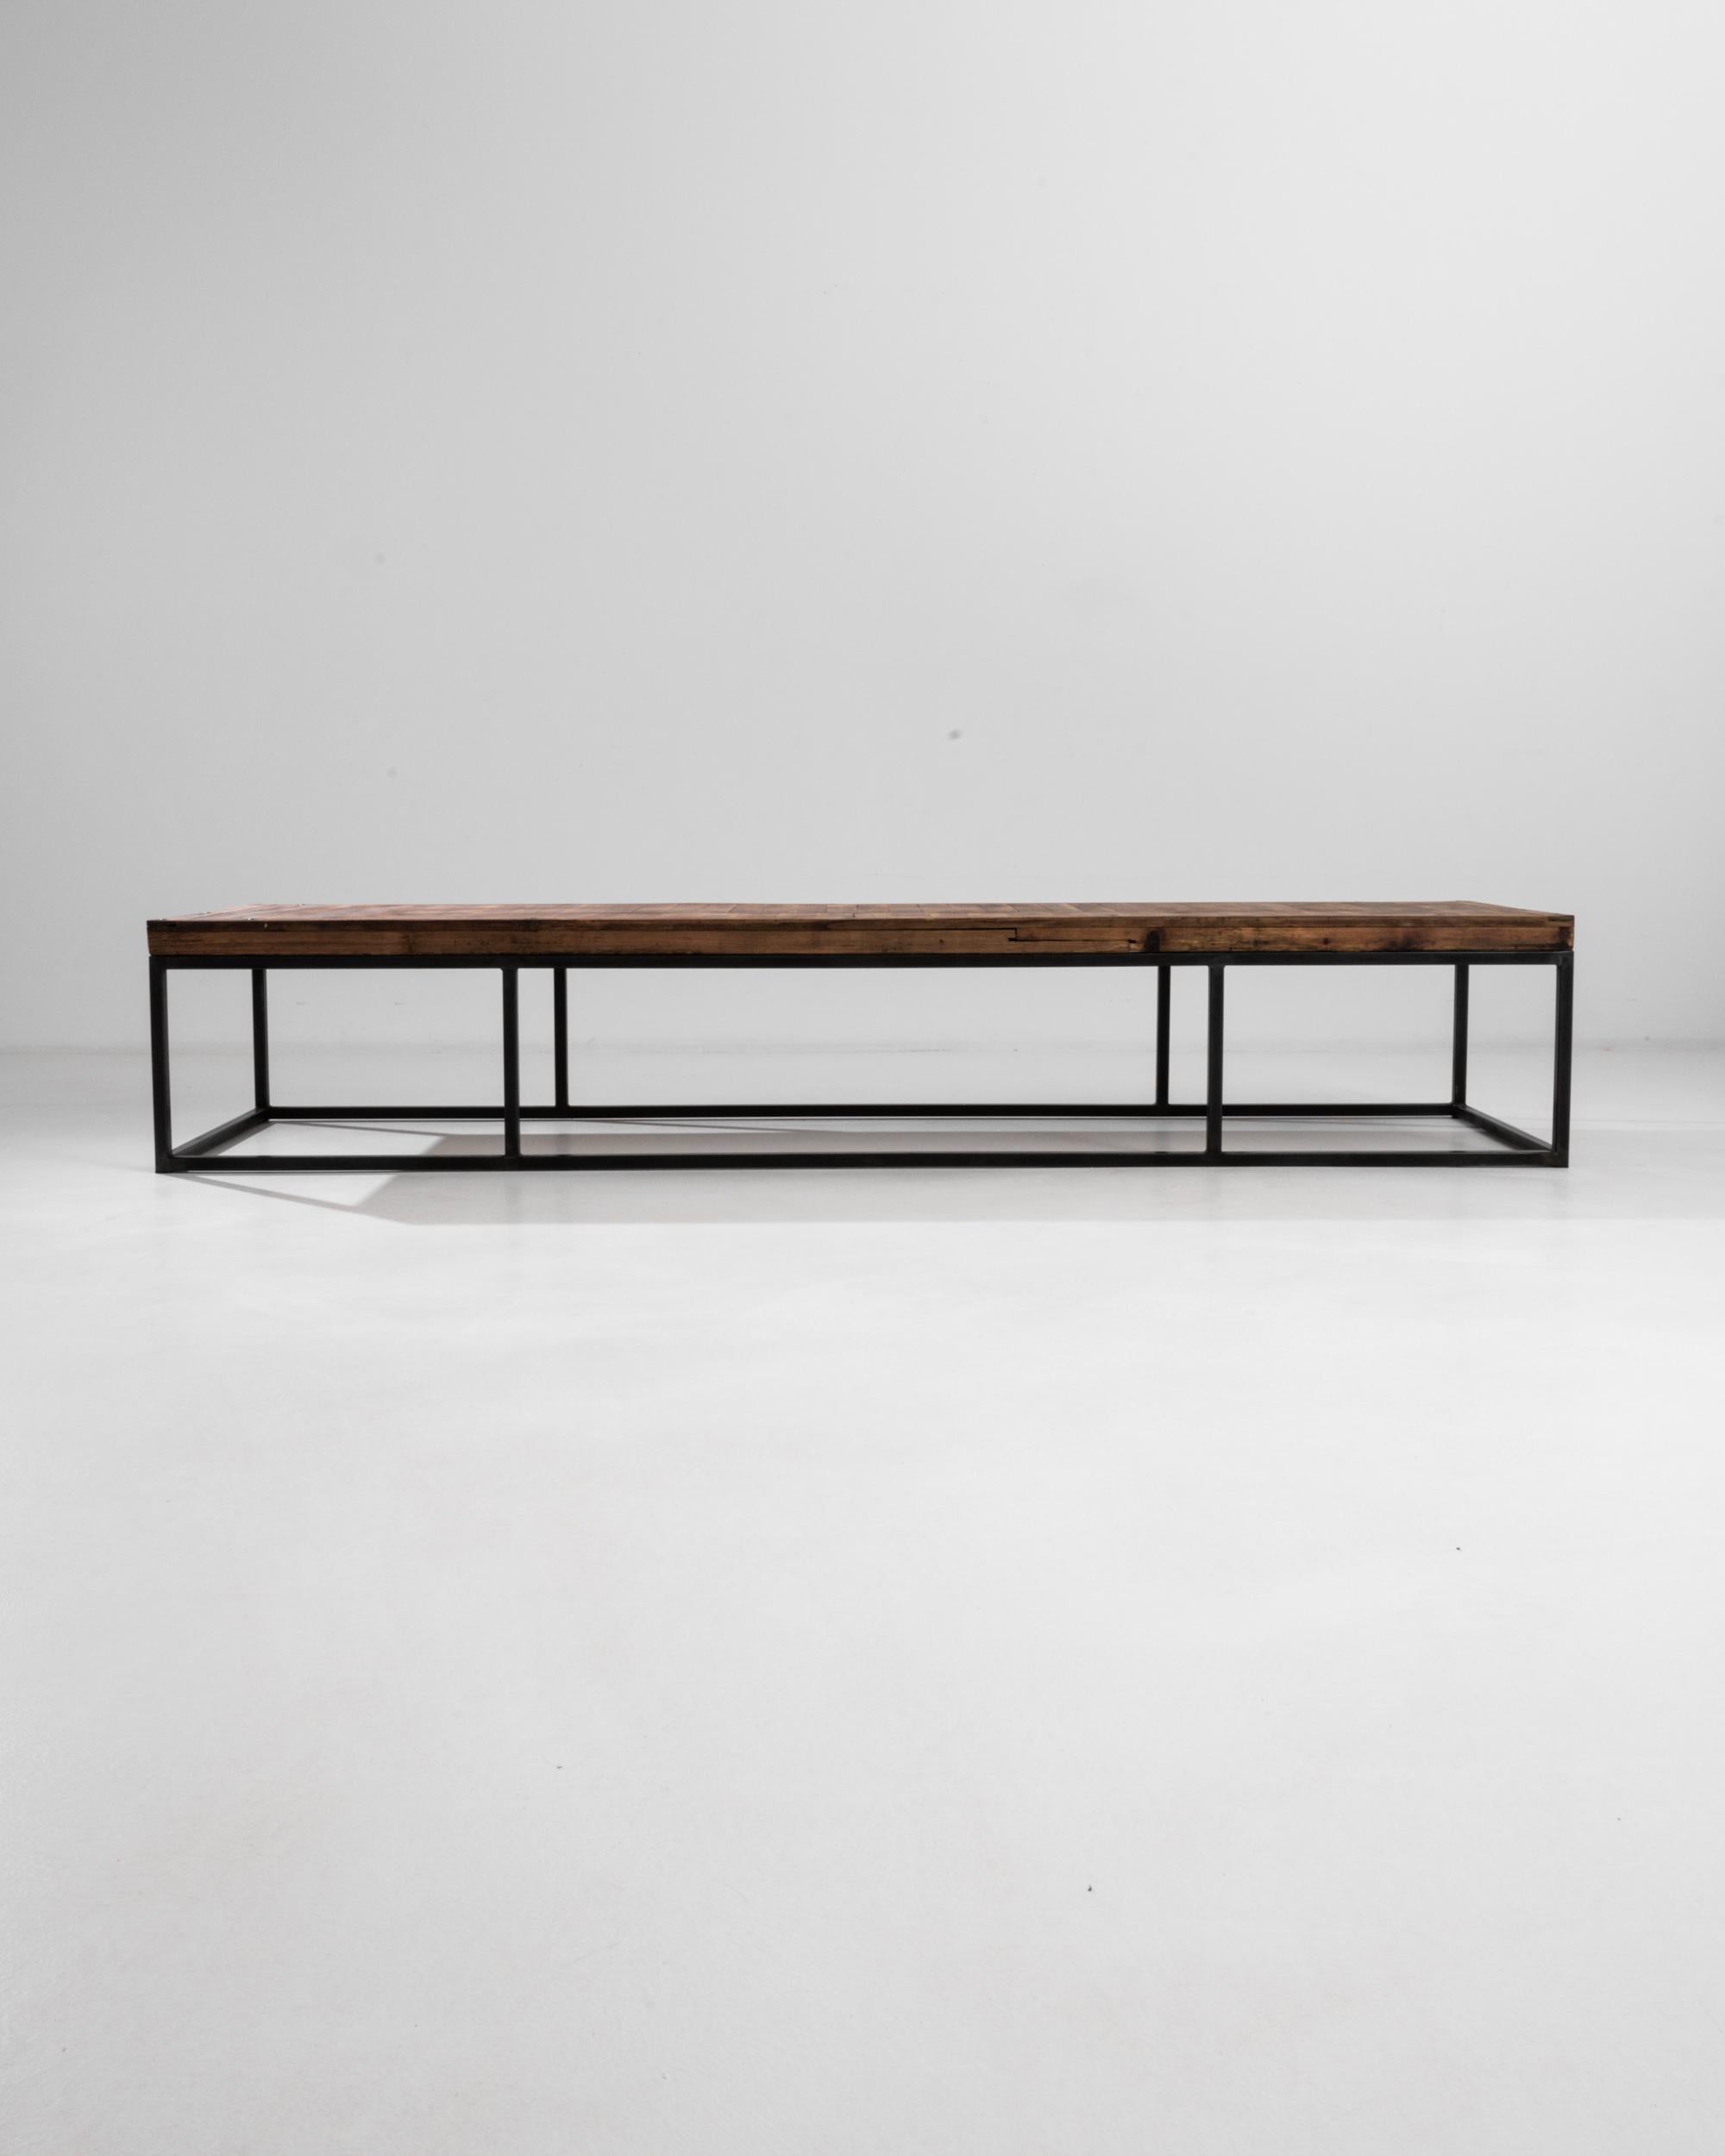 This minimalist coffee table presents an alluring geometry, its steel base divided into three parts make a balanced interplay of solids and voids. The unique length of the table provides an avant-garde profile, while the raw wood finish of the